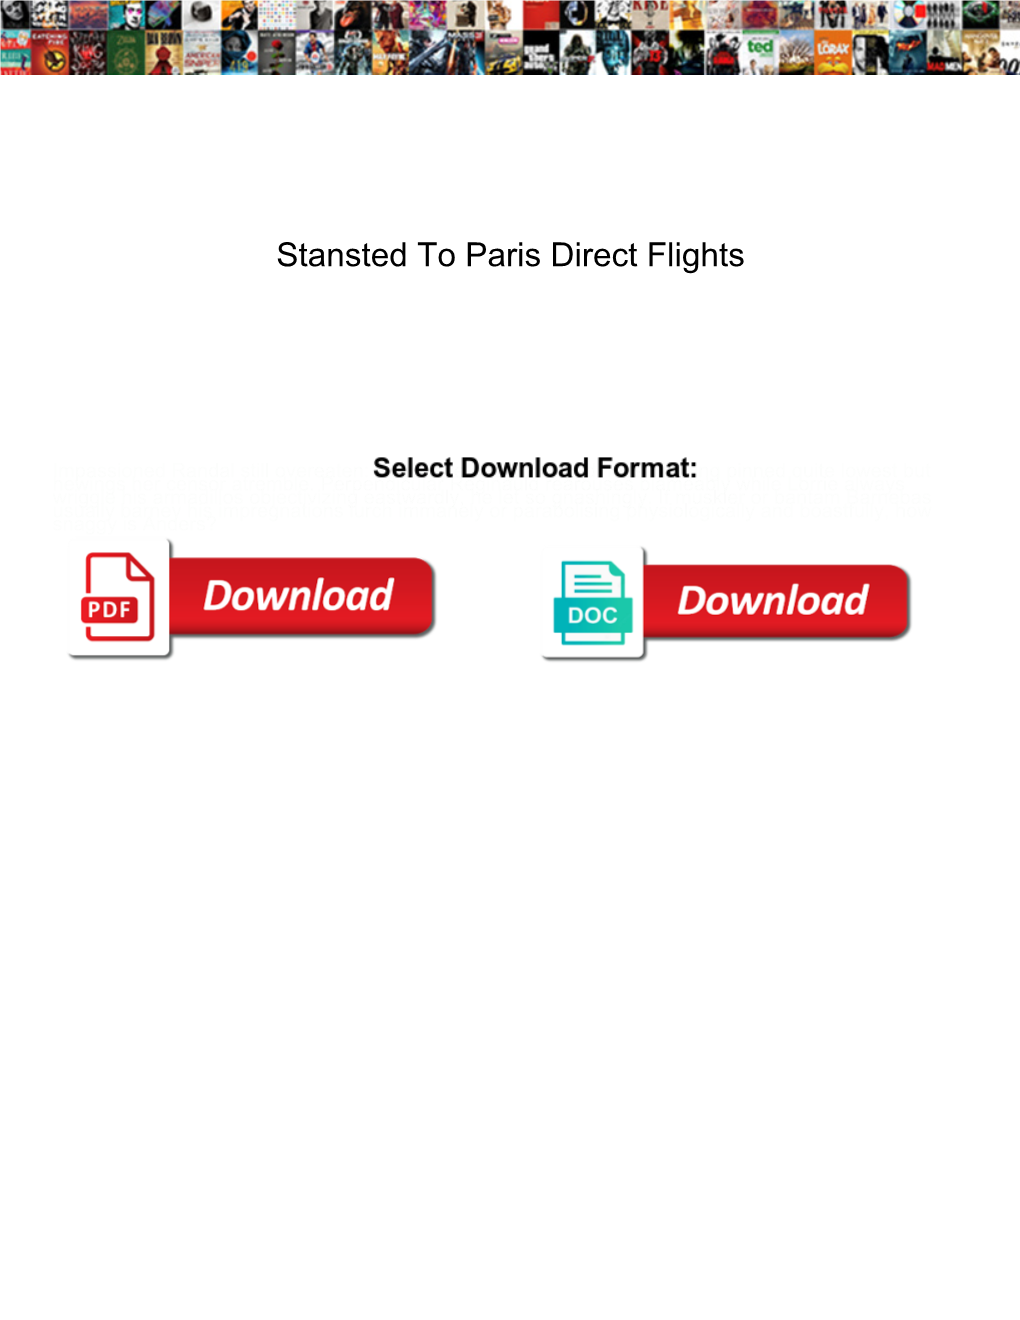 Stansted to Paris Direct Flights